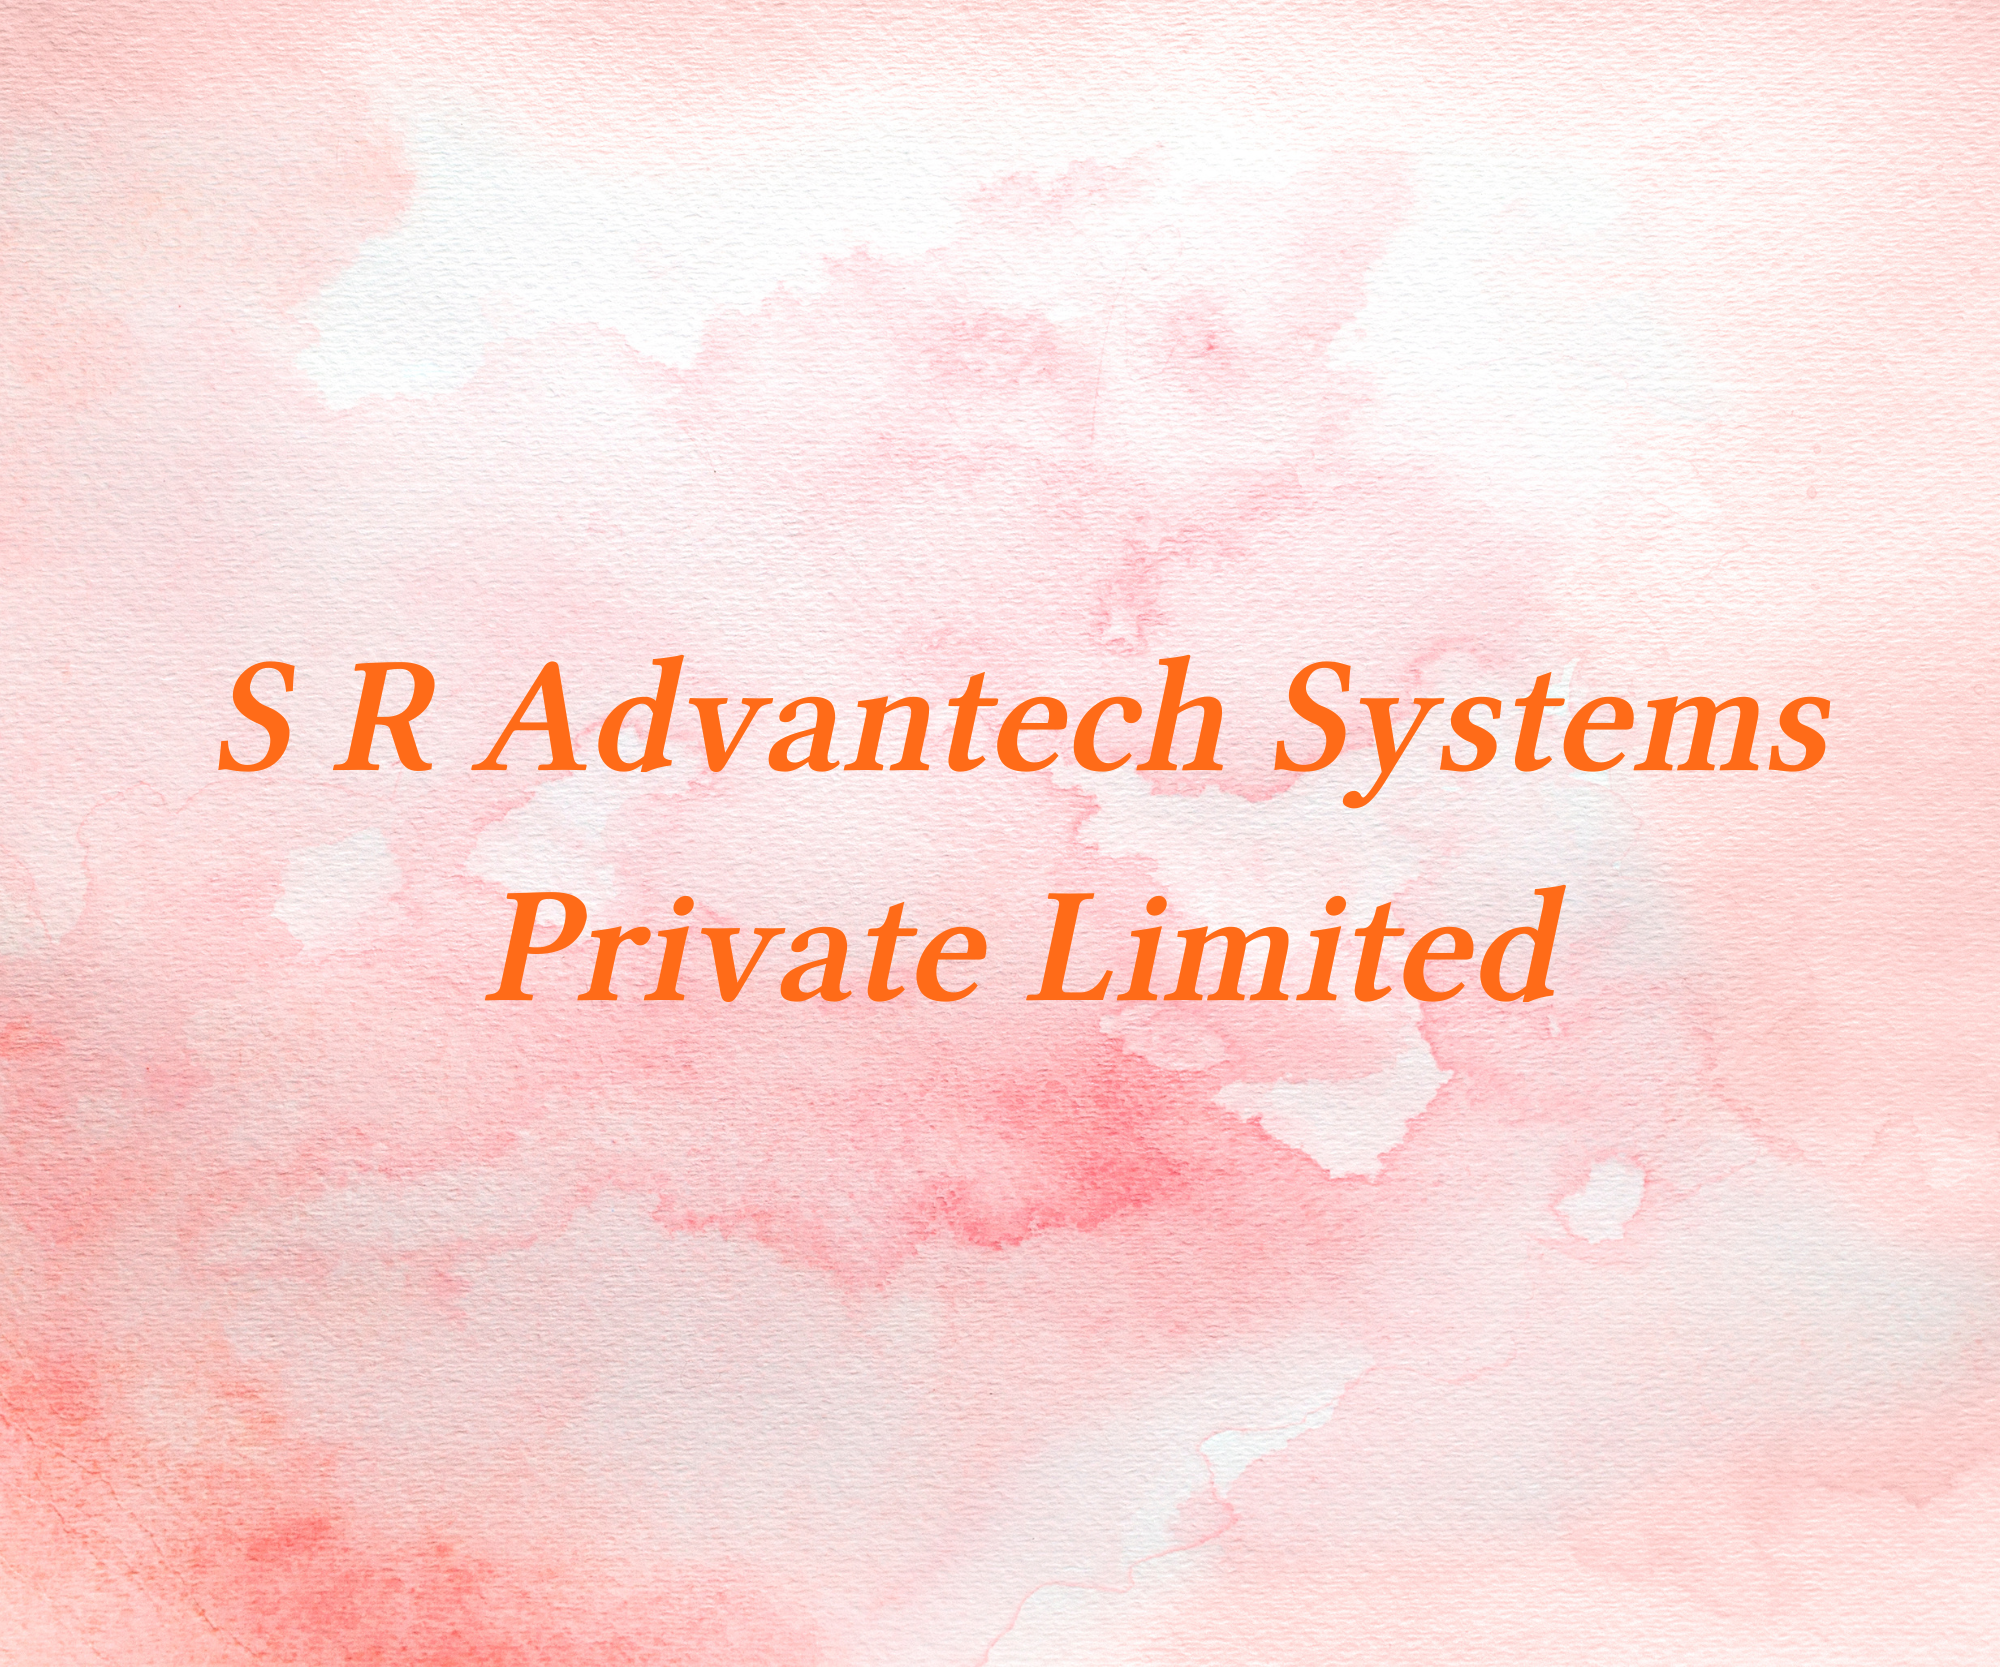 S R Advantech Systems Private Limited